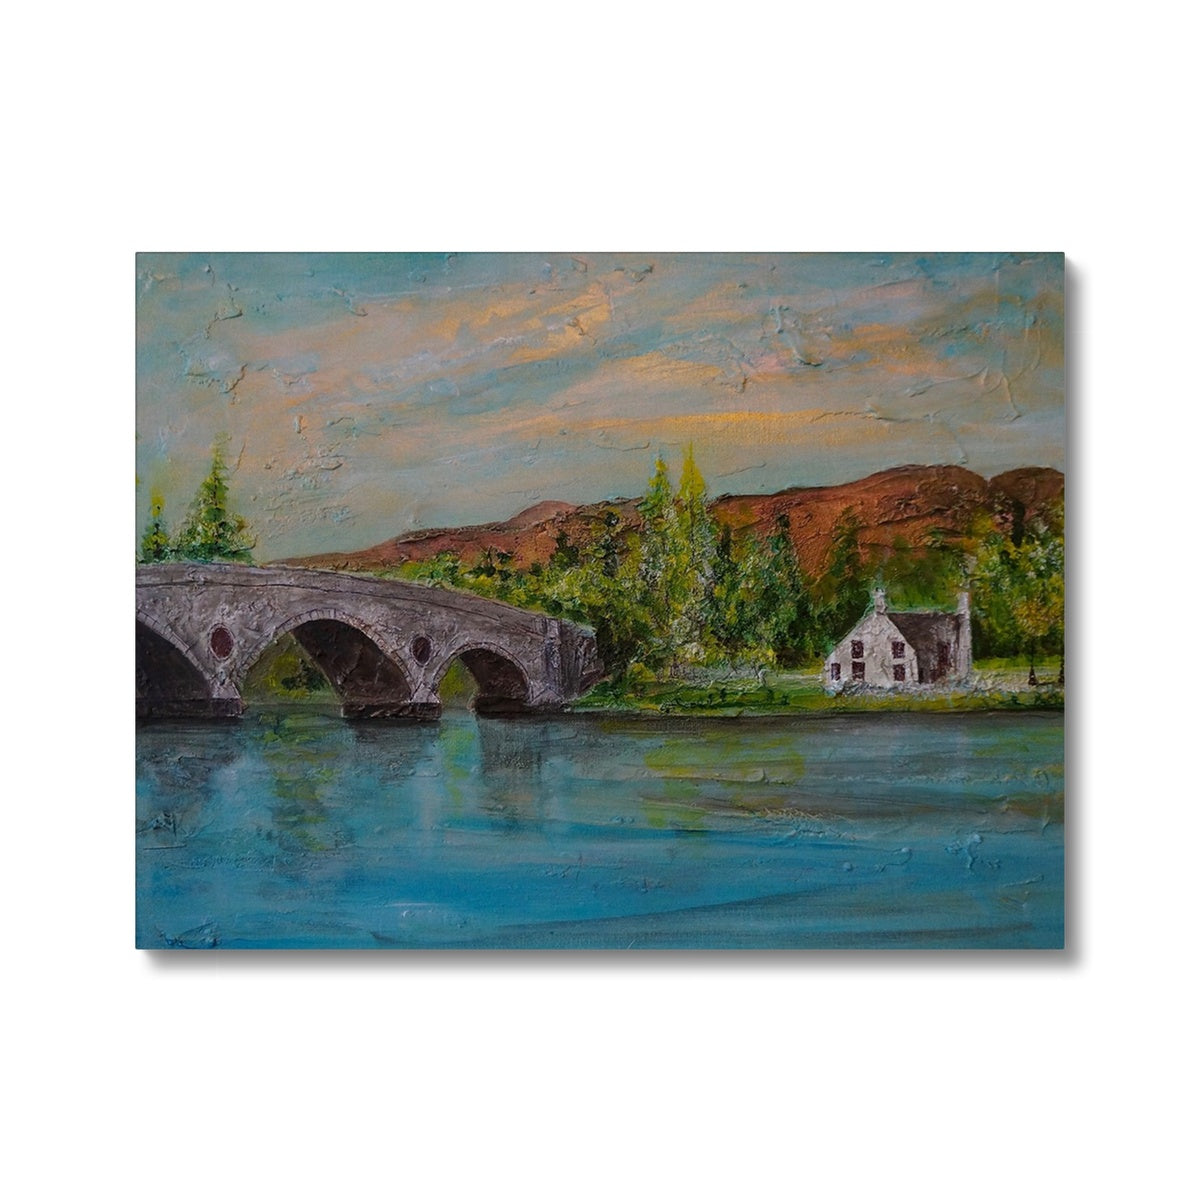 Kenmore Bridge ii Painting | Canvas From Scotland-Contemporary Stretched Canvas Prints-Scottish Highlands & Lowlands Art Gallery-24"x18"-Paintings, Prints, Homeware, Art Gifts From Scotland By Scottish Artist Kevin Hunter